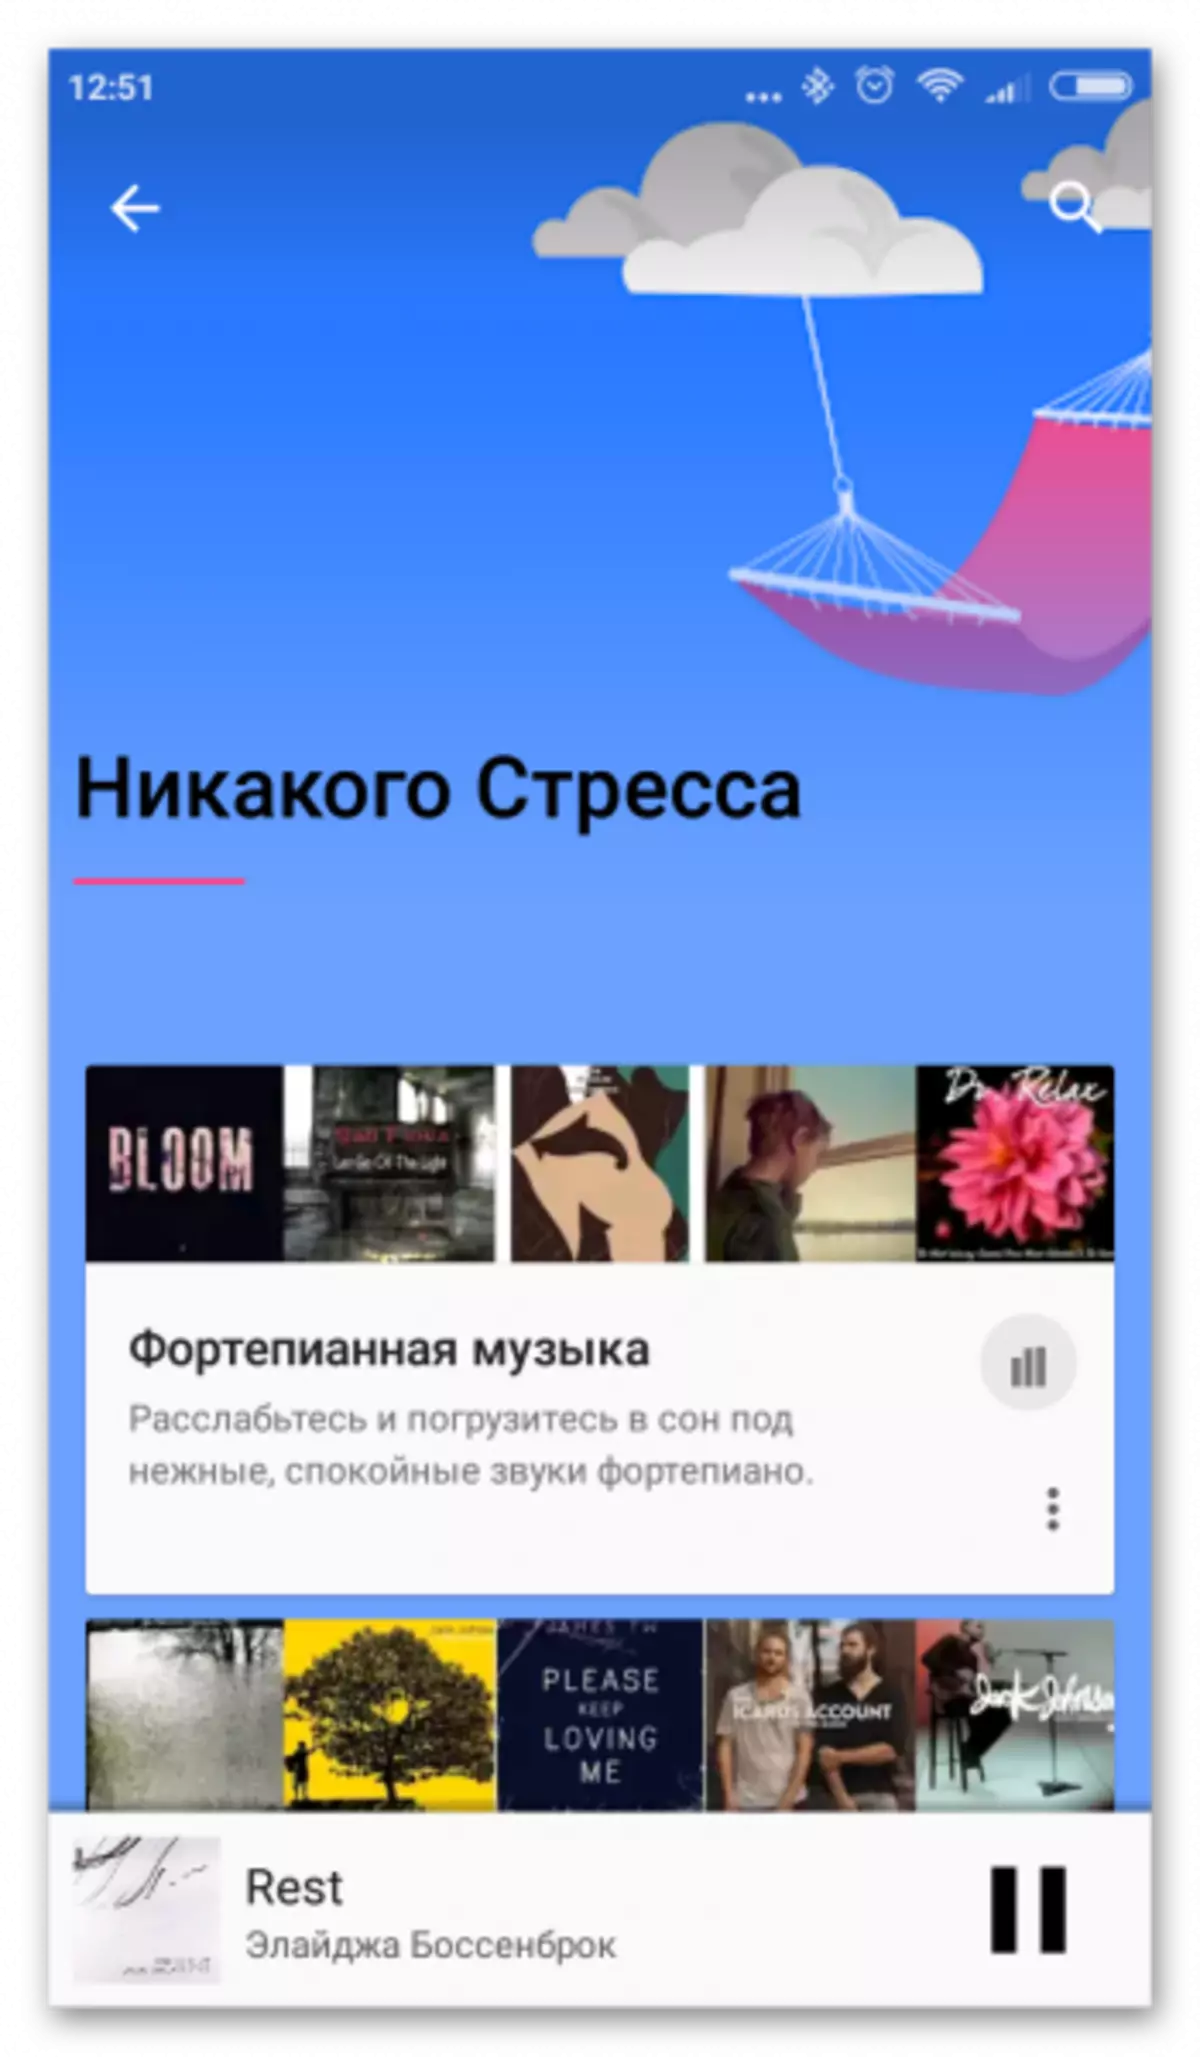 Google Play Music pour Android